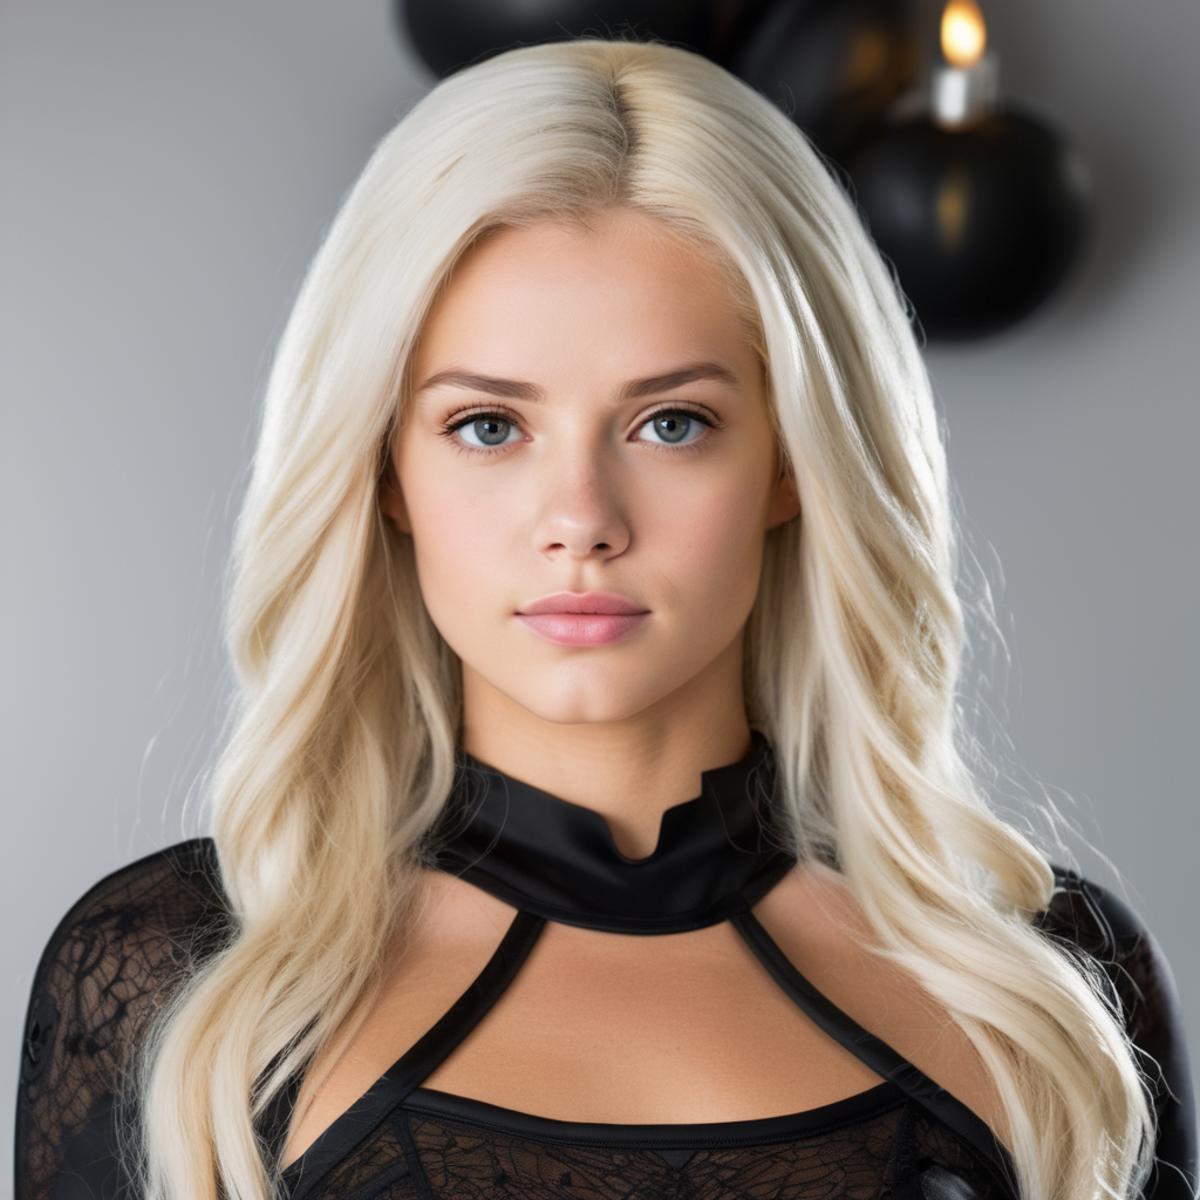 Blonde Woman with Blue Eyes Wearing Black Shirt and Lace Dress.